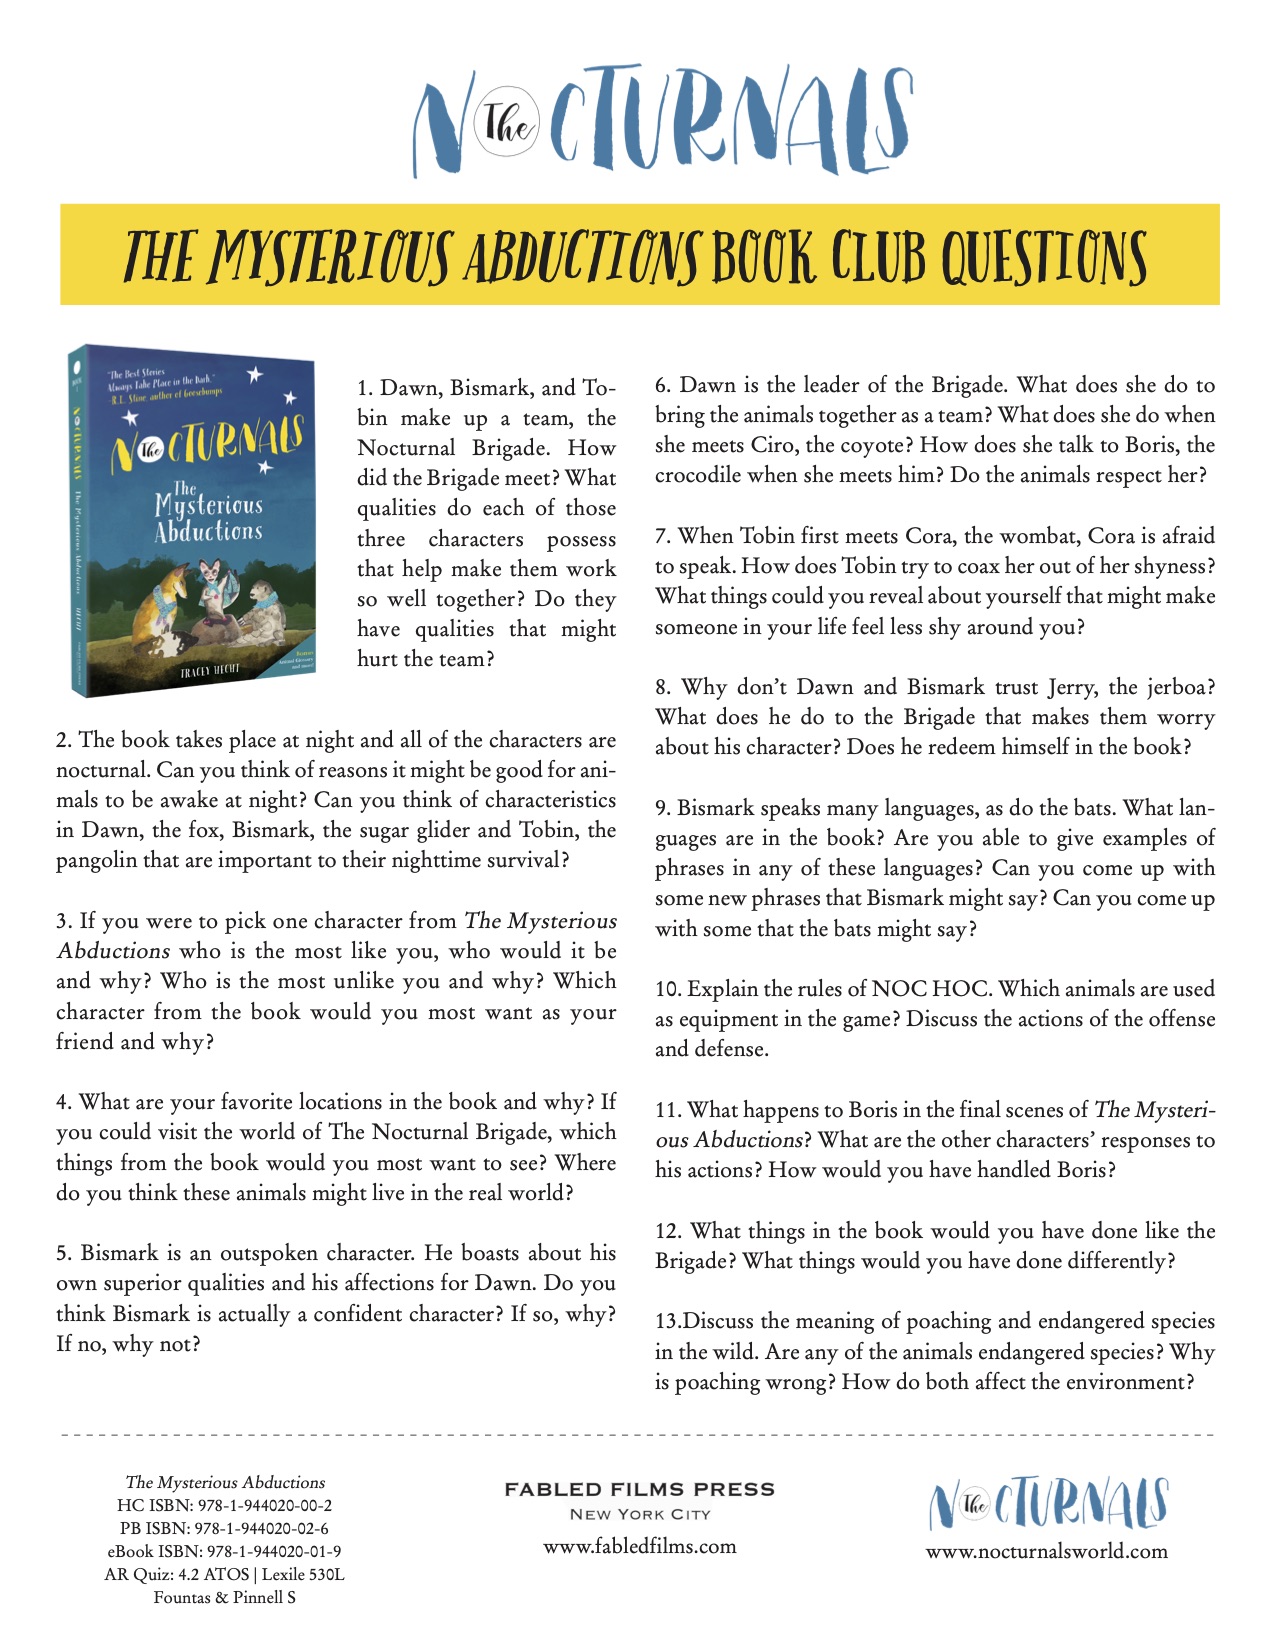 This Book Club Questions pdf includes all four book club questions associated with each title in The Nocturnals middle grade series. 